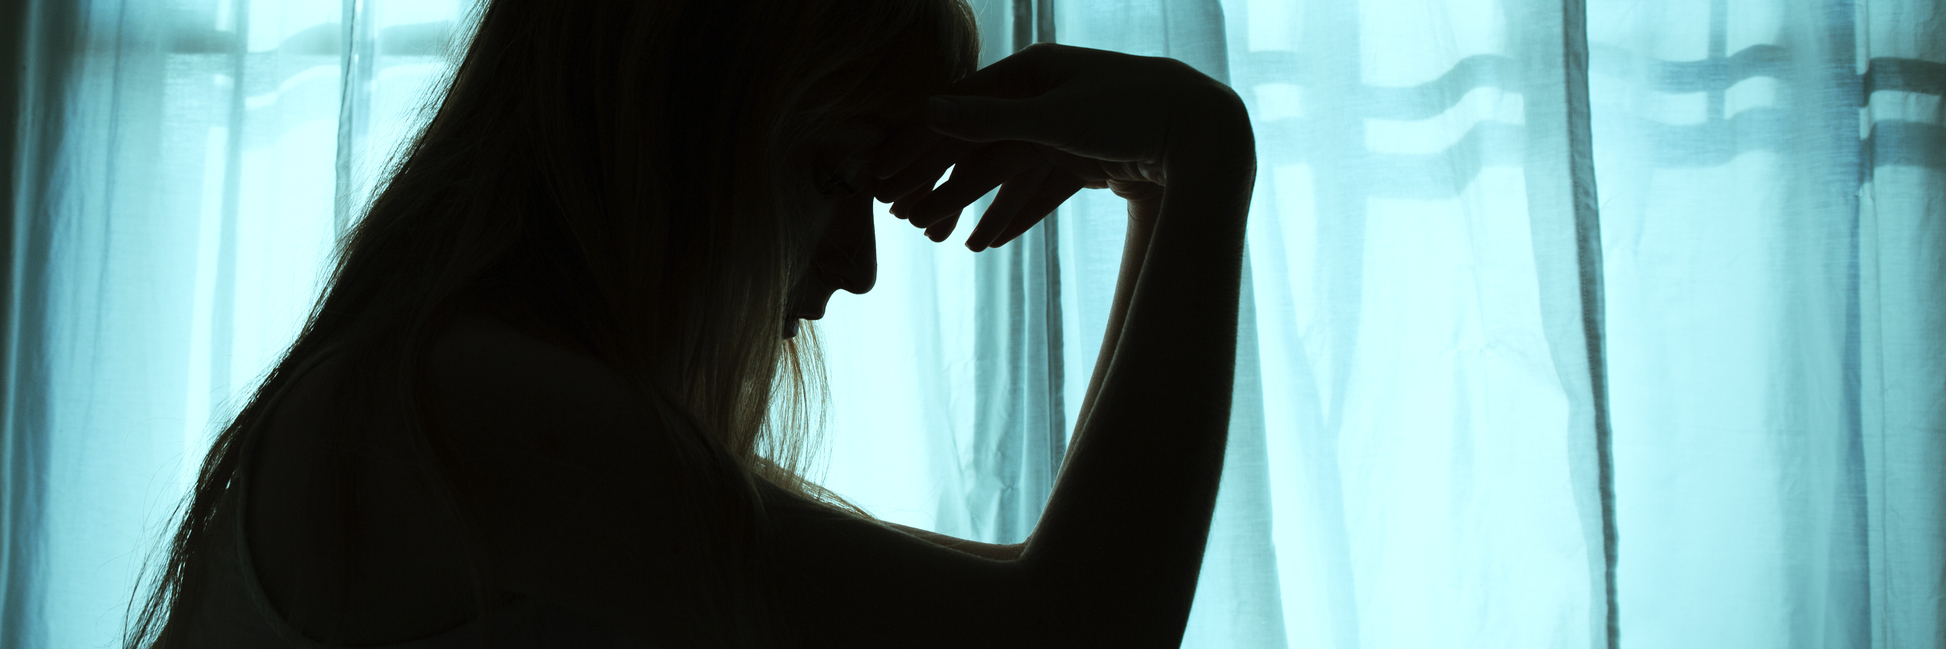 silhouette of a woman sitting by a window